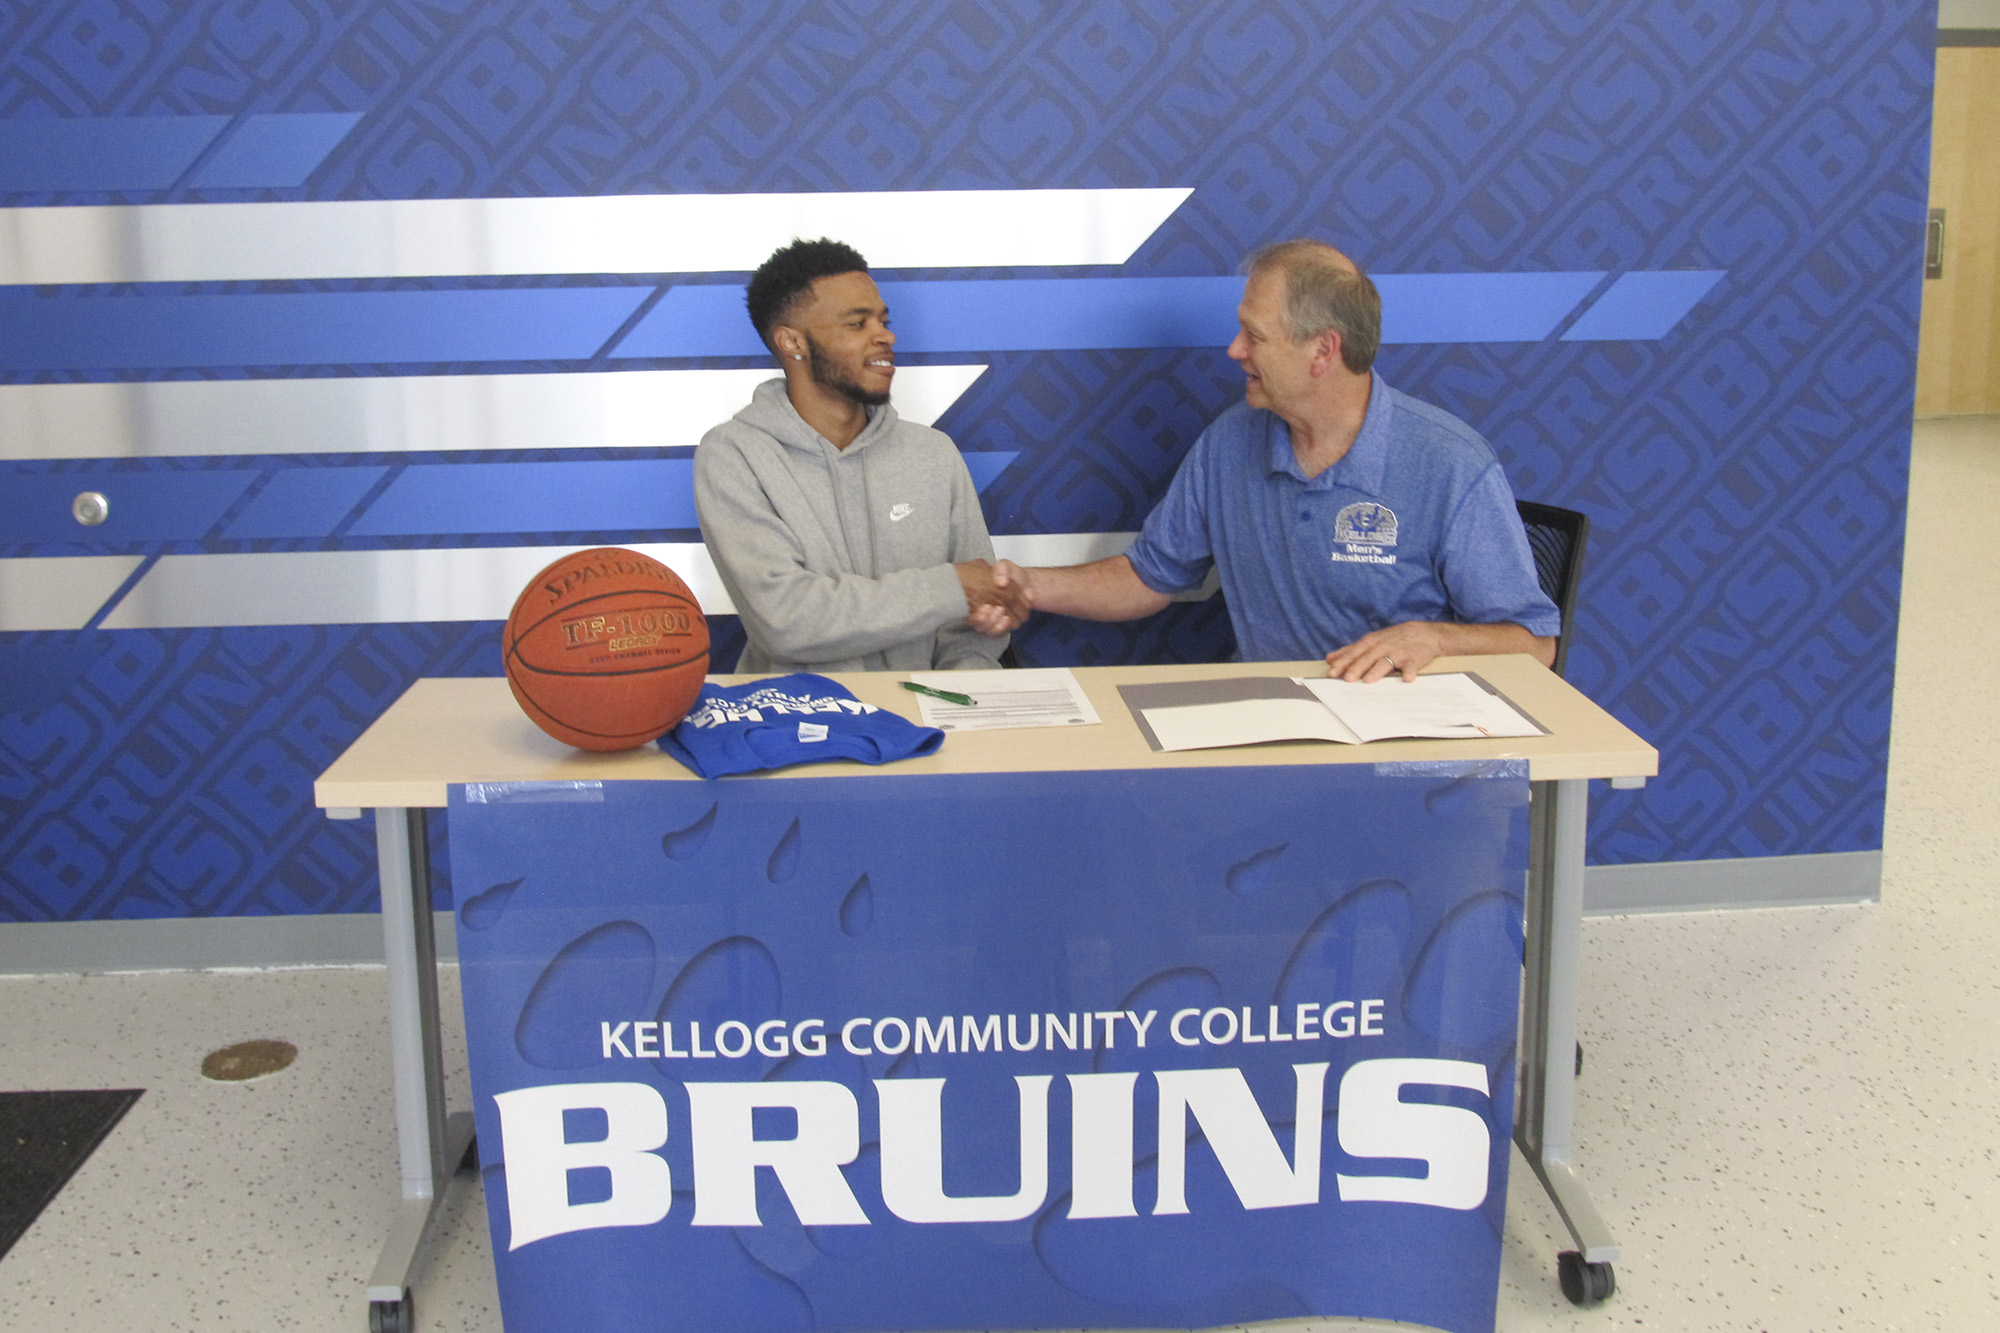 Pictured, from left to right, are Jamari Newell and KCC’s Head Men’s Basketball Coach Gary Sprague.